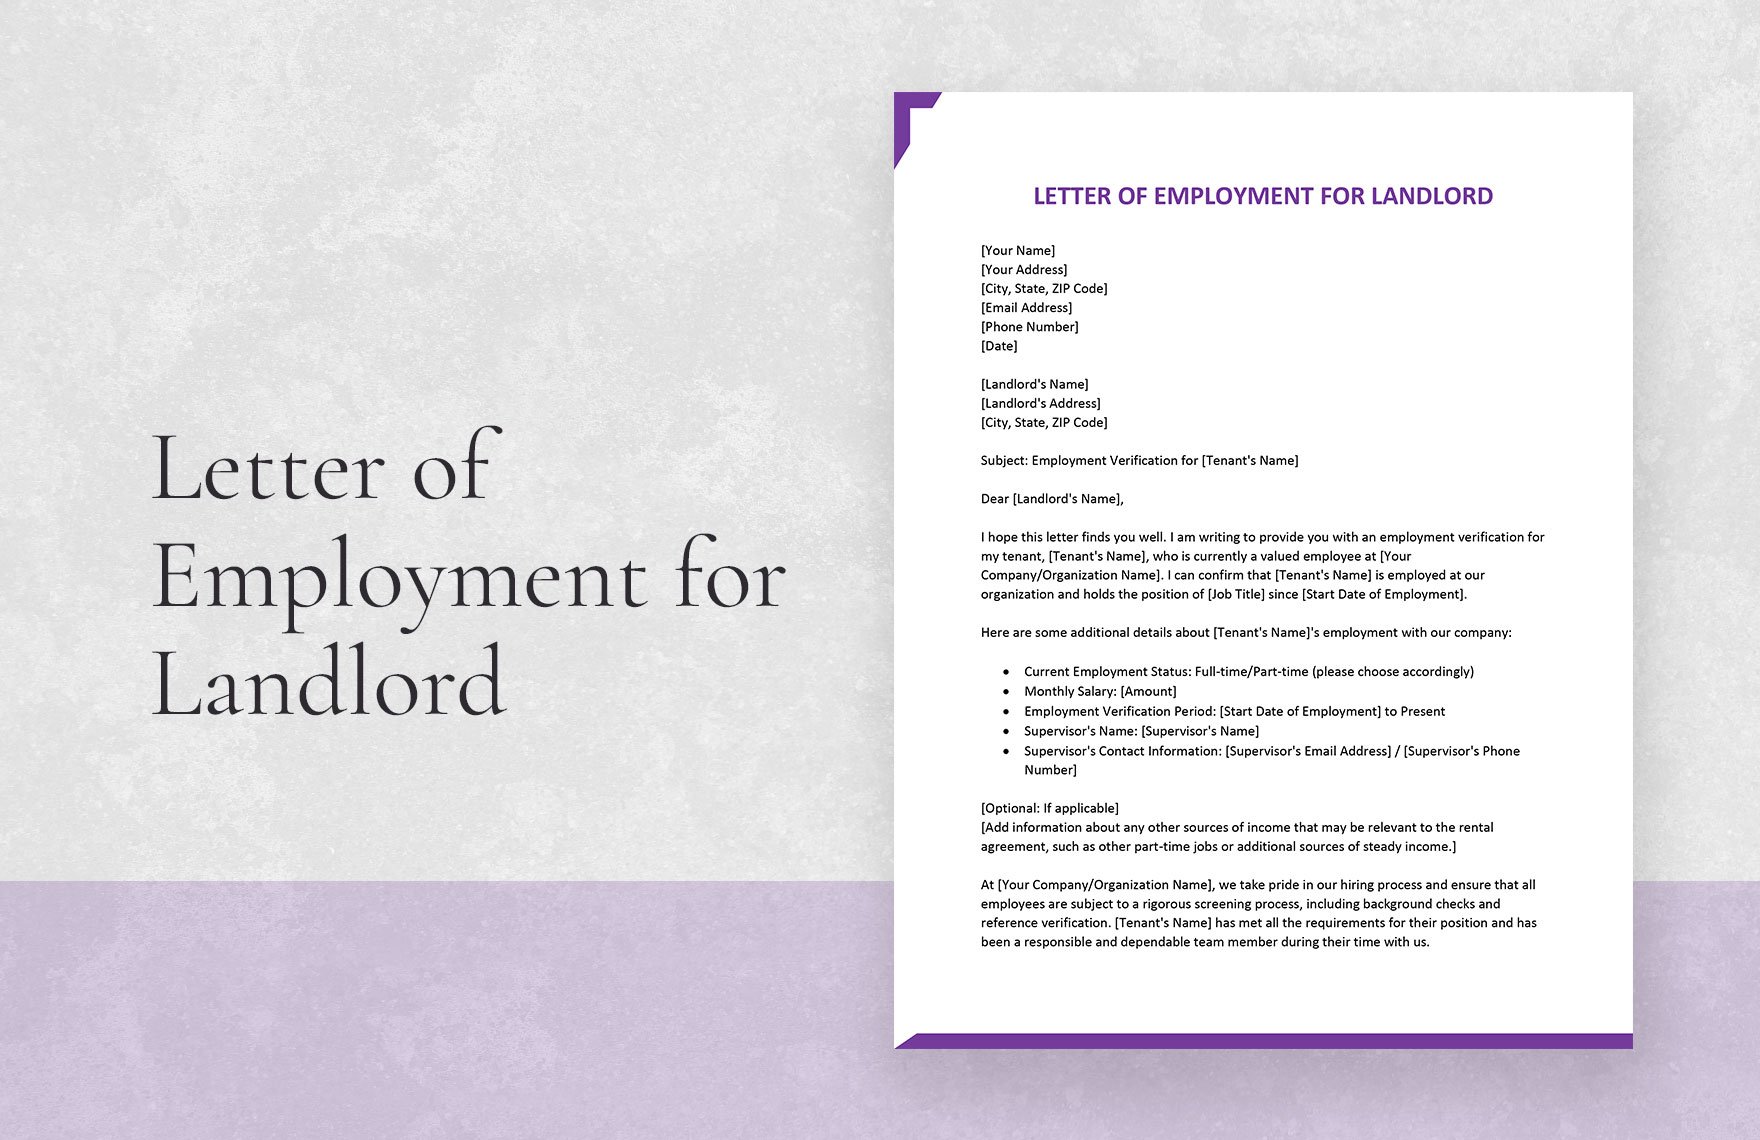 Letter of Employment for Landlord